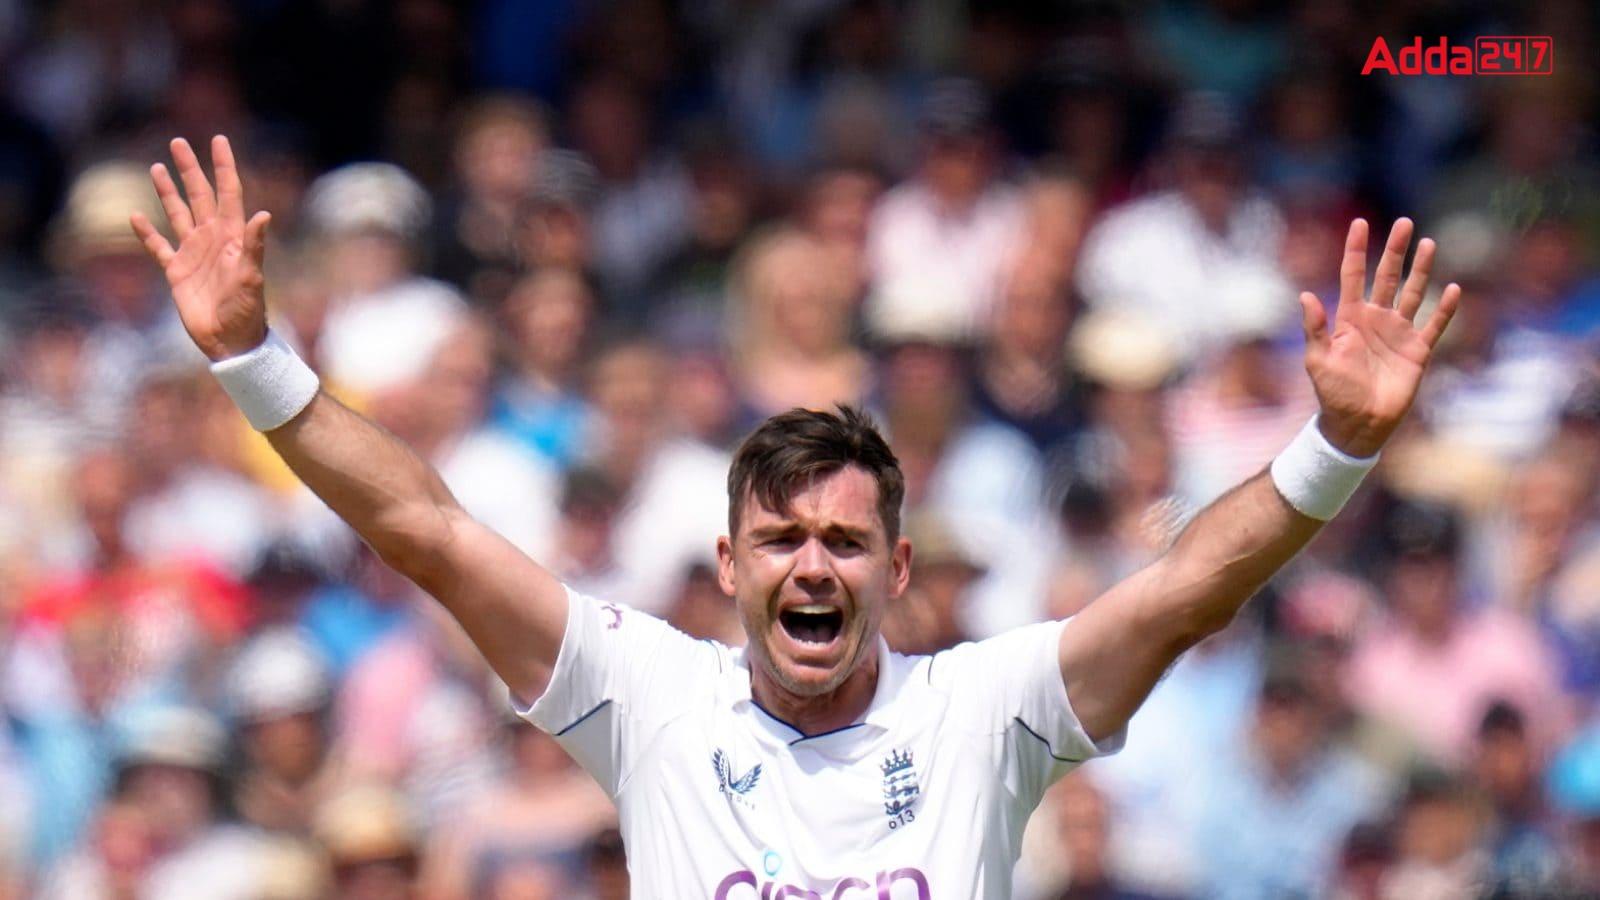 England's James Anderson becomes most successful pacer in international cricket_50.1